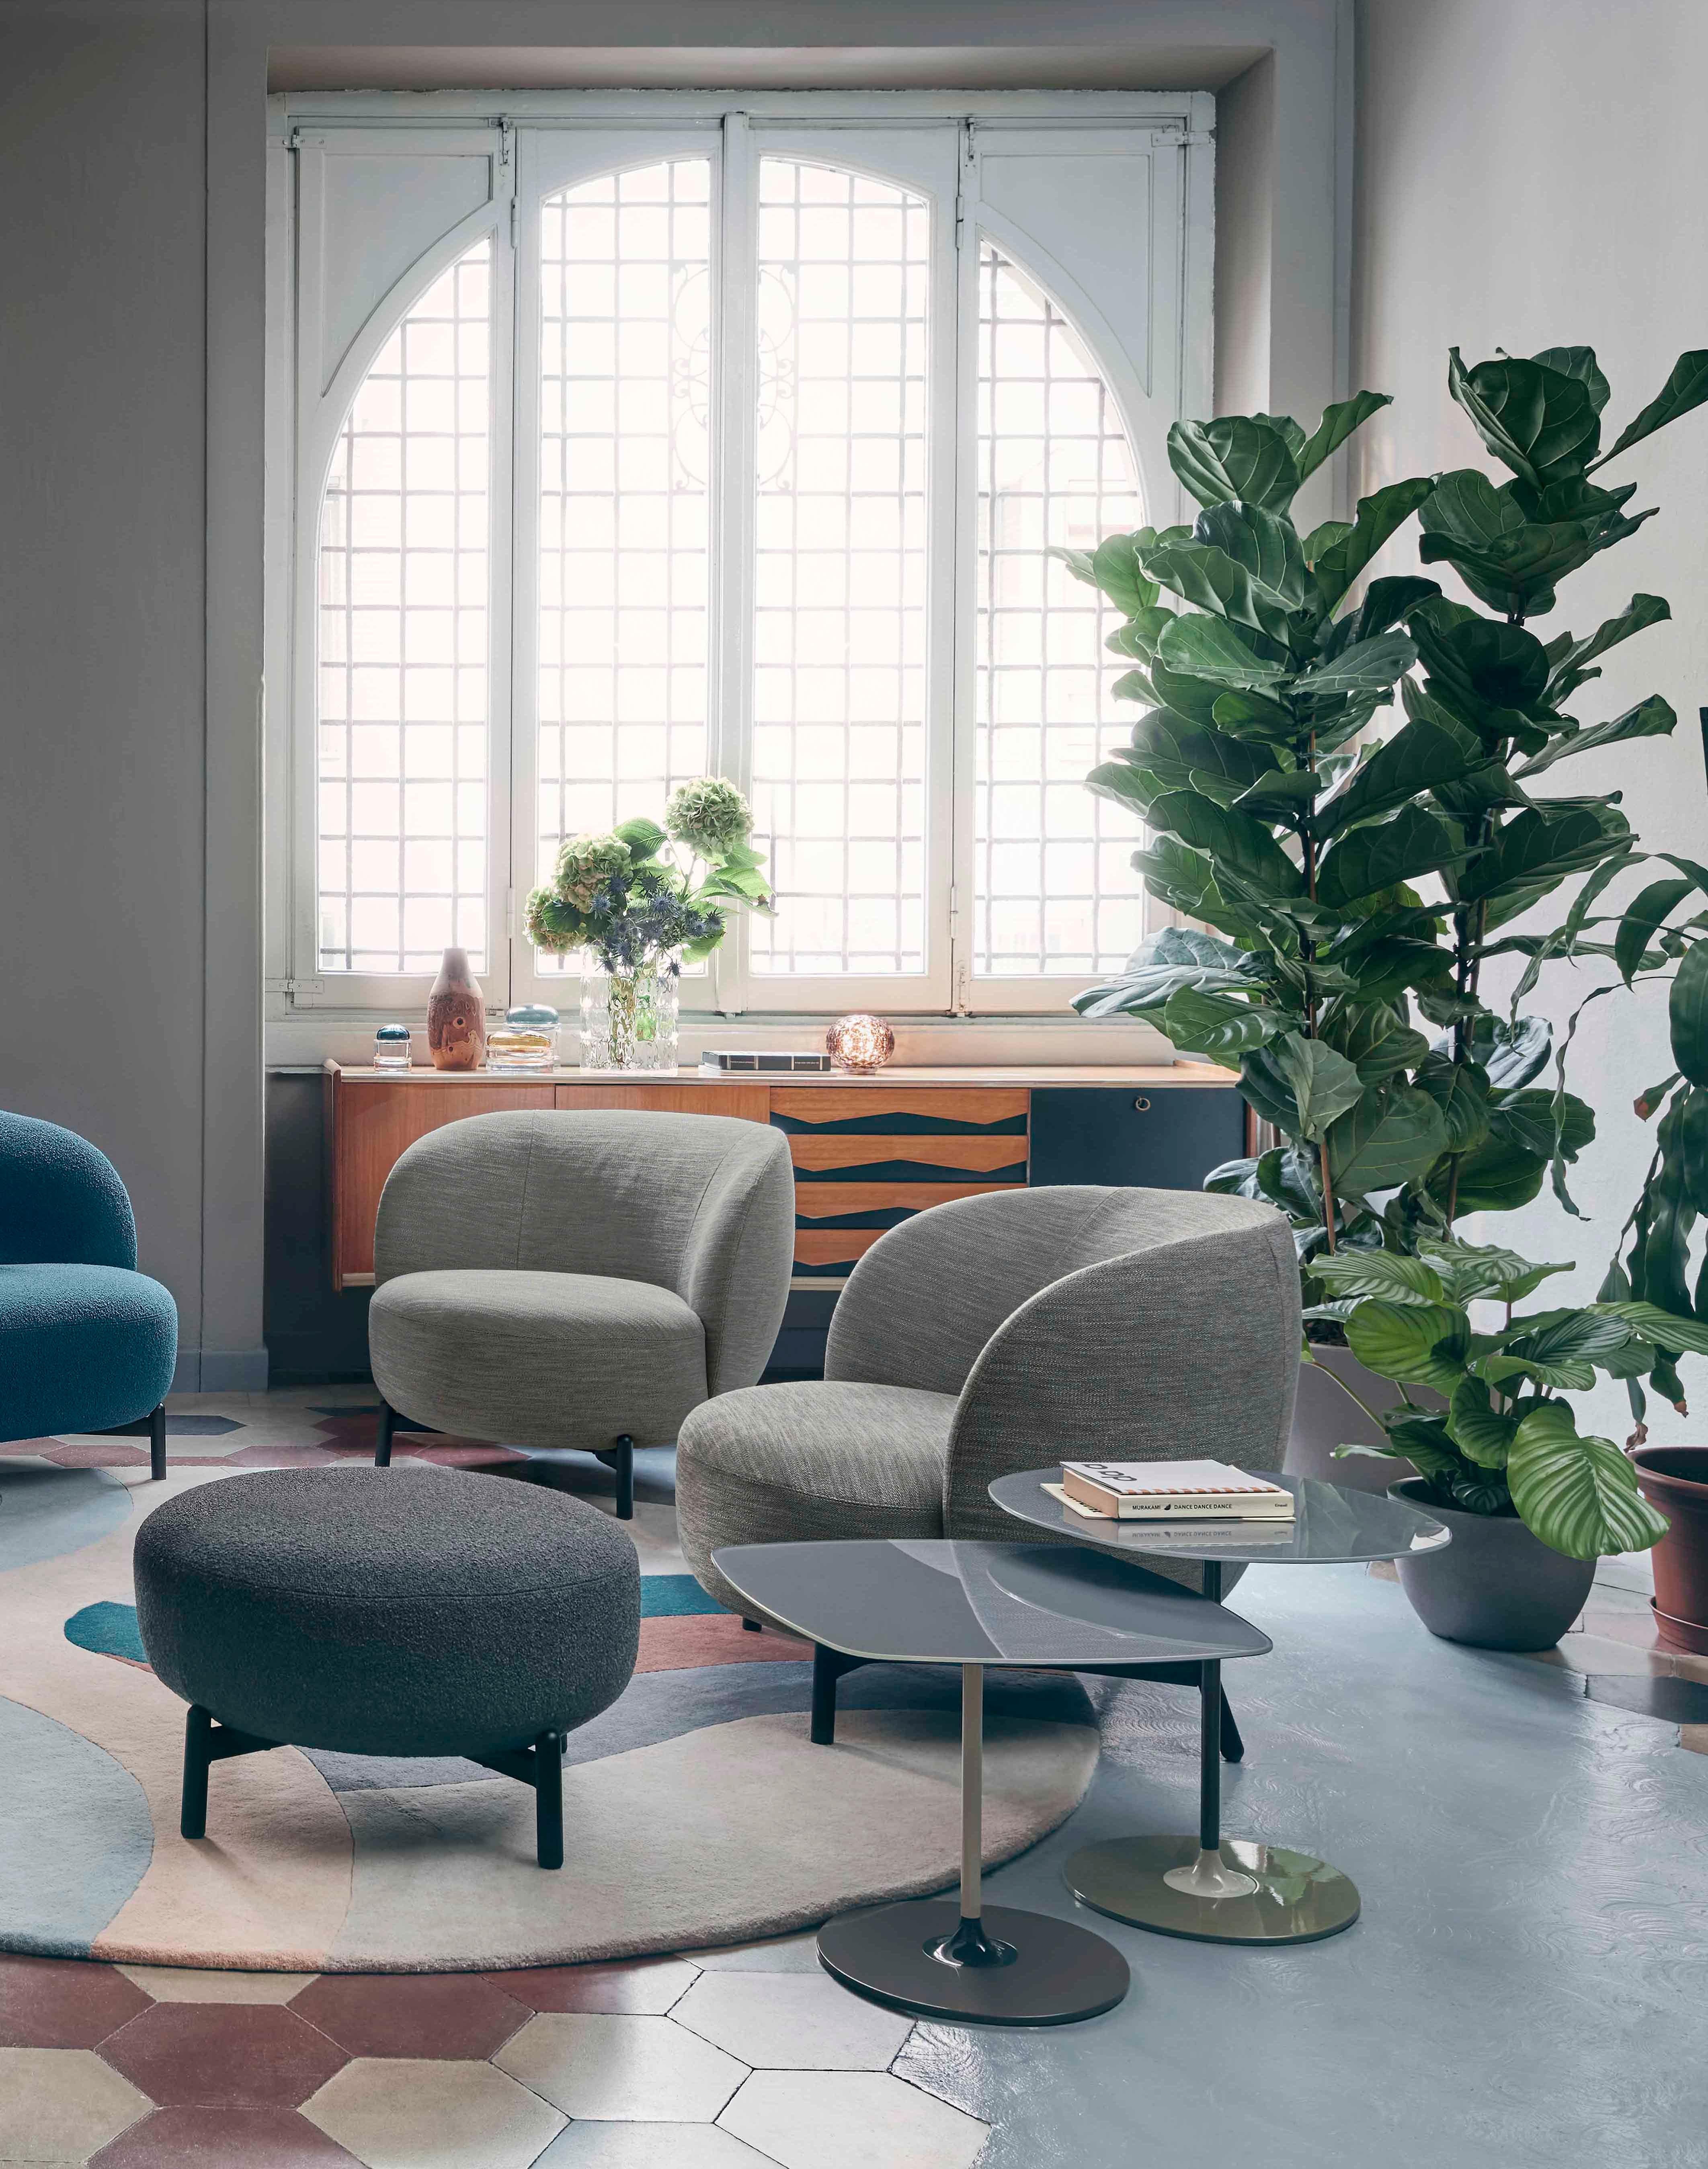 Lunam is an enchanting living space furniture collection inspired by the dreamy atmosphere of a lunar landscape. An essential, painted metal structure supports generously dimensioned upholstered sections. 
sofa, armchair and pouffe come in soft